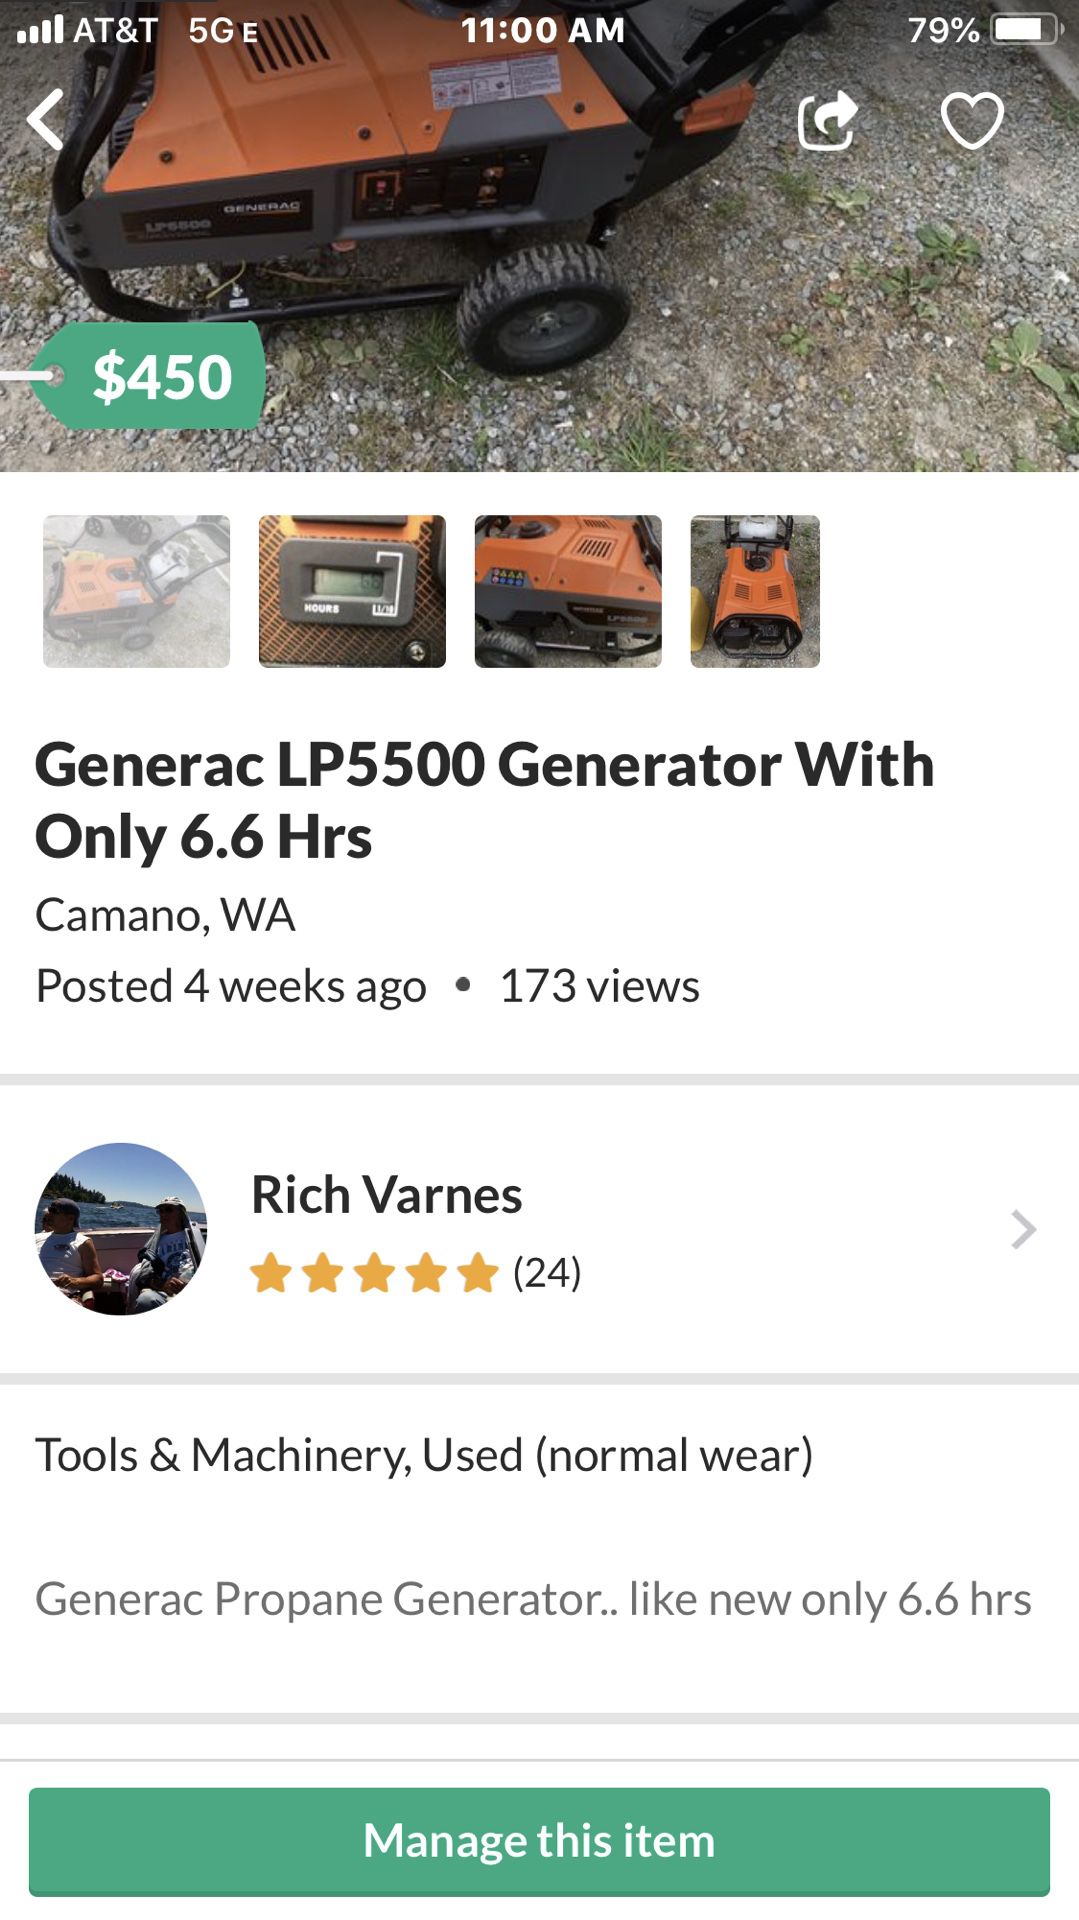 Generac LP5500 Generator With Only 6.6 Hrs